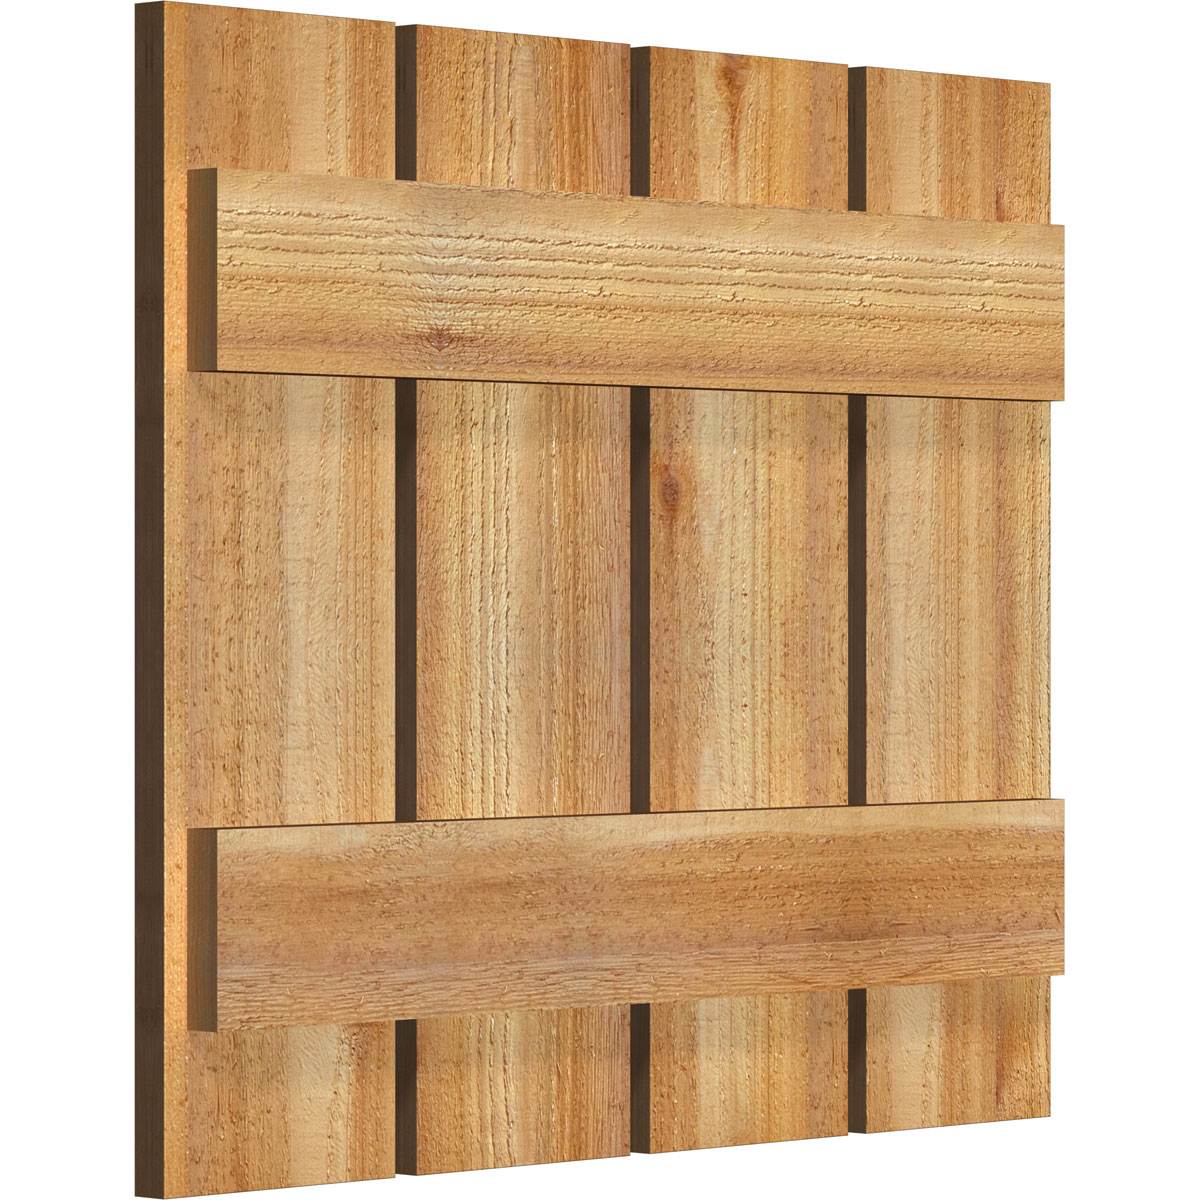 Ekena Millwork 2-Pack 23-in W x 20-in H Unfinished Board and Batten Spaced Wood Western Red cedar Exterior Shutters